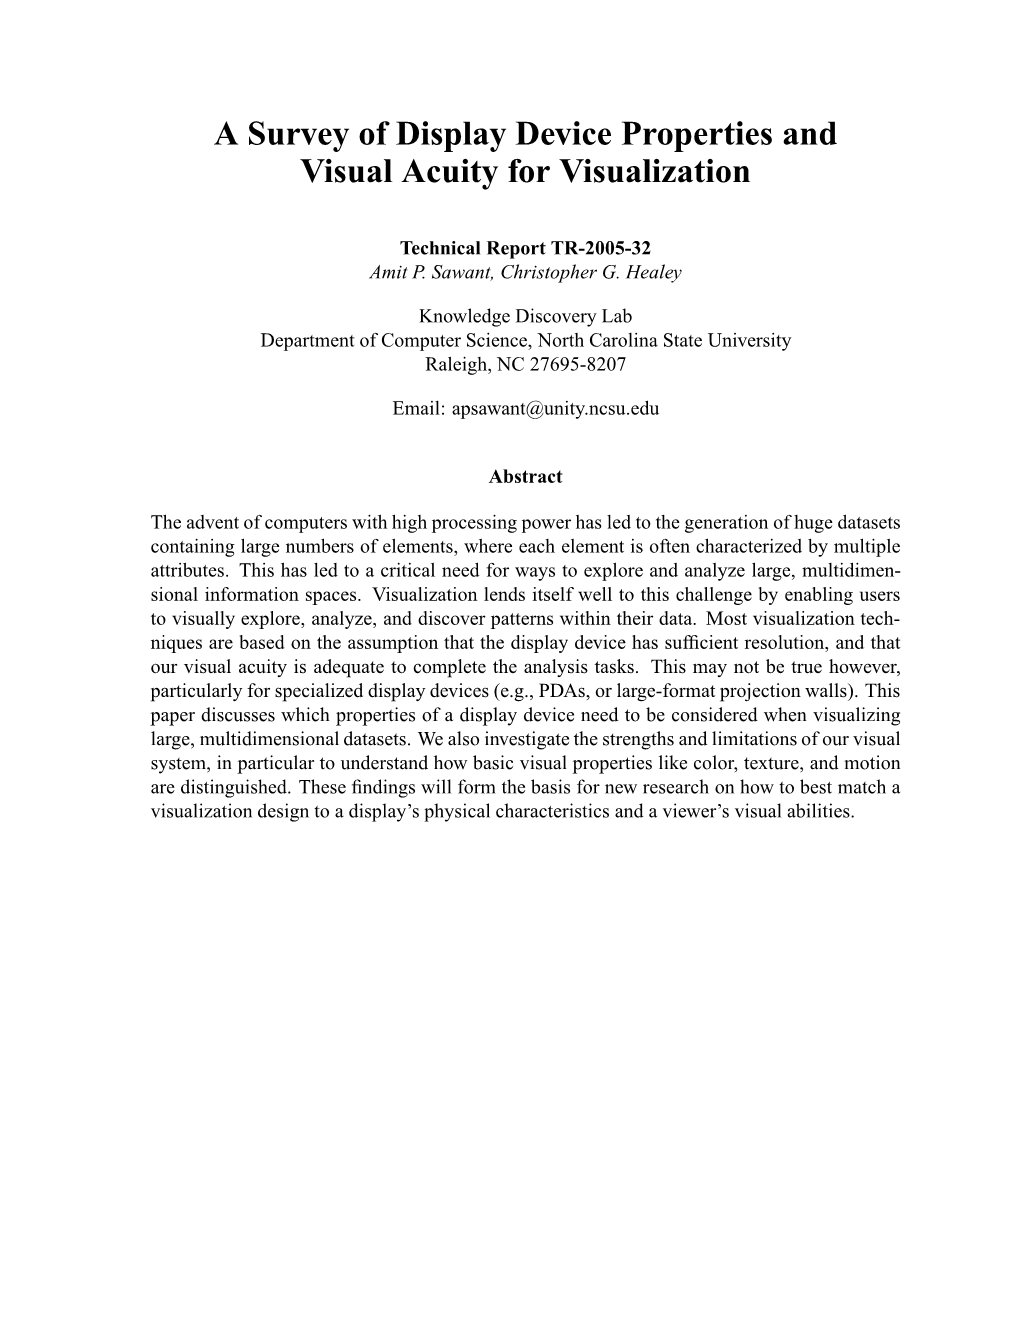 A Survey of Display Device Properties and Visual Acuity for Visualization